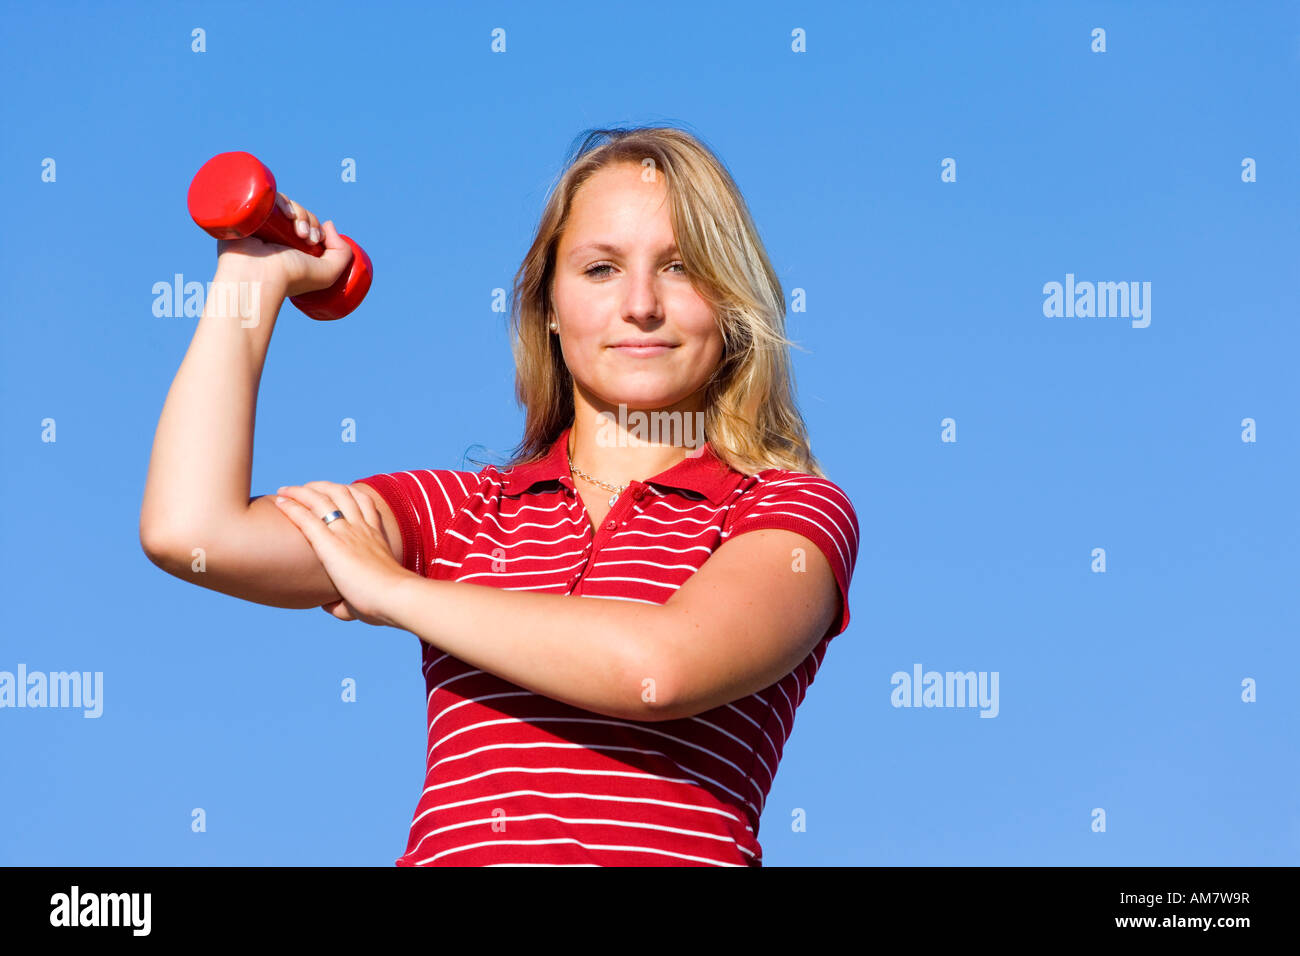 A young woman, 20 years old, training with barbells Stock Photo